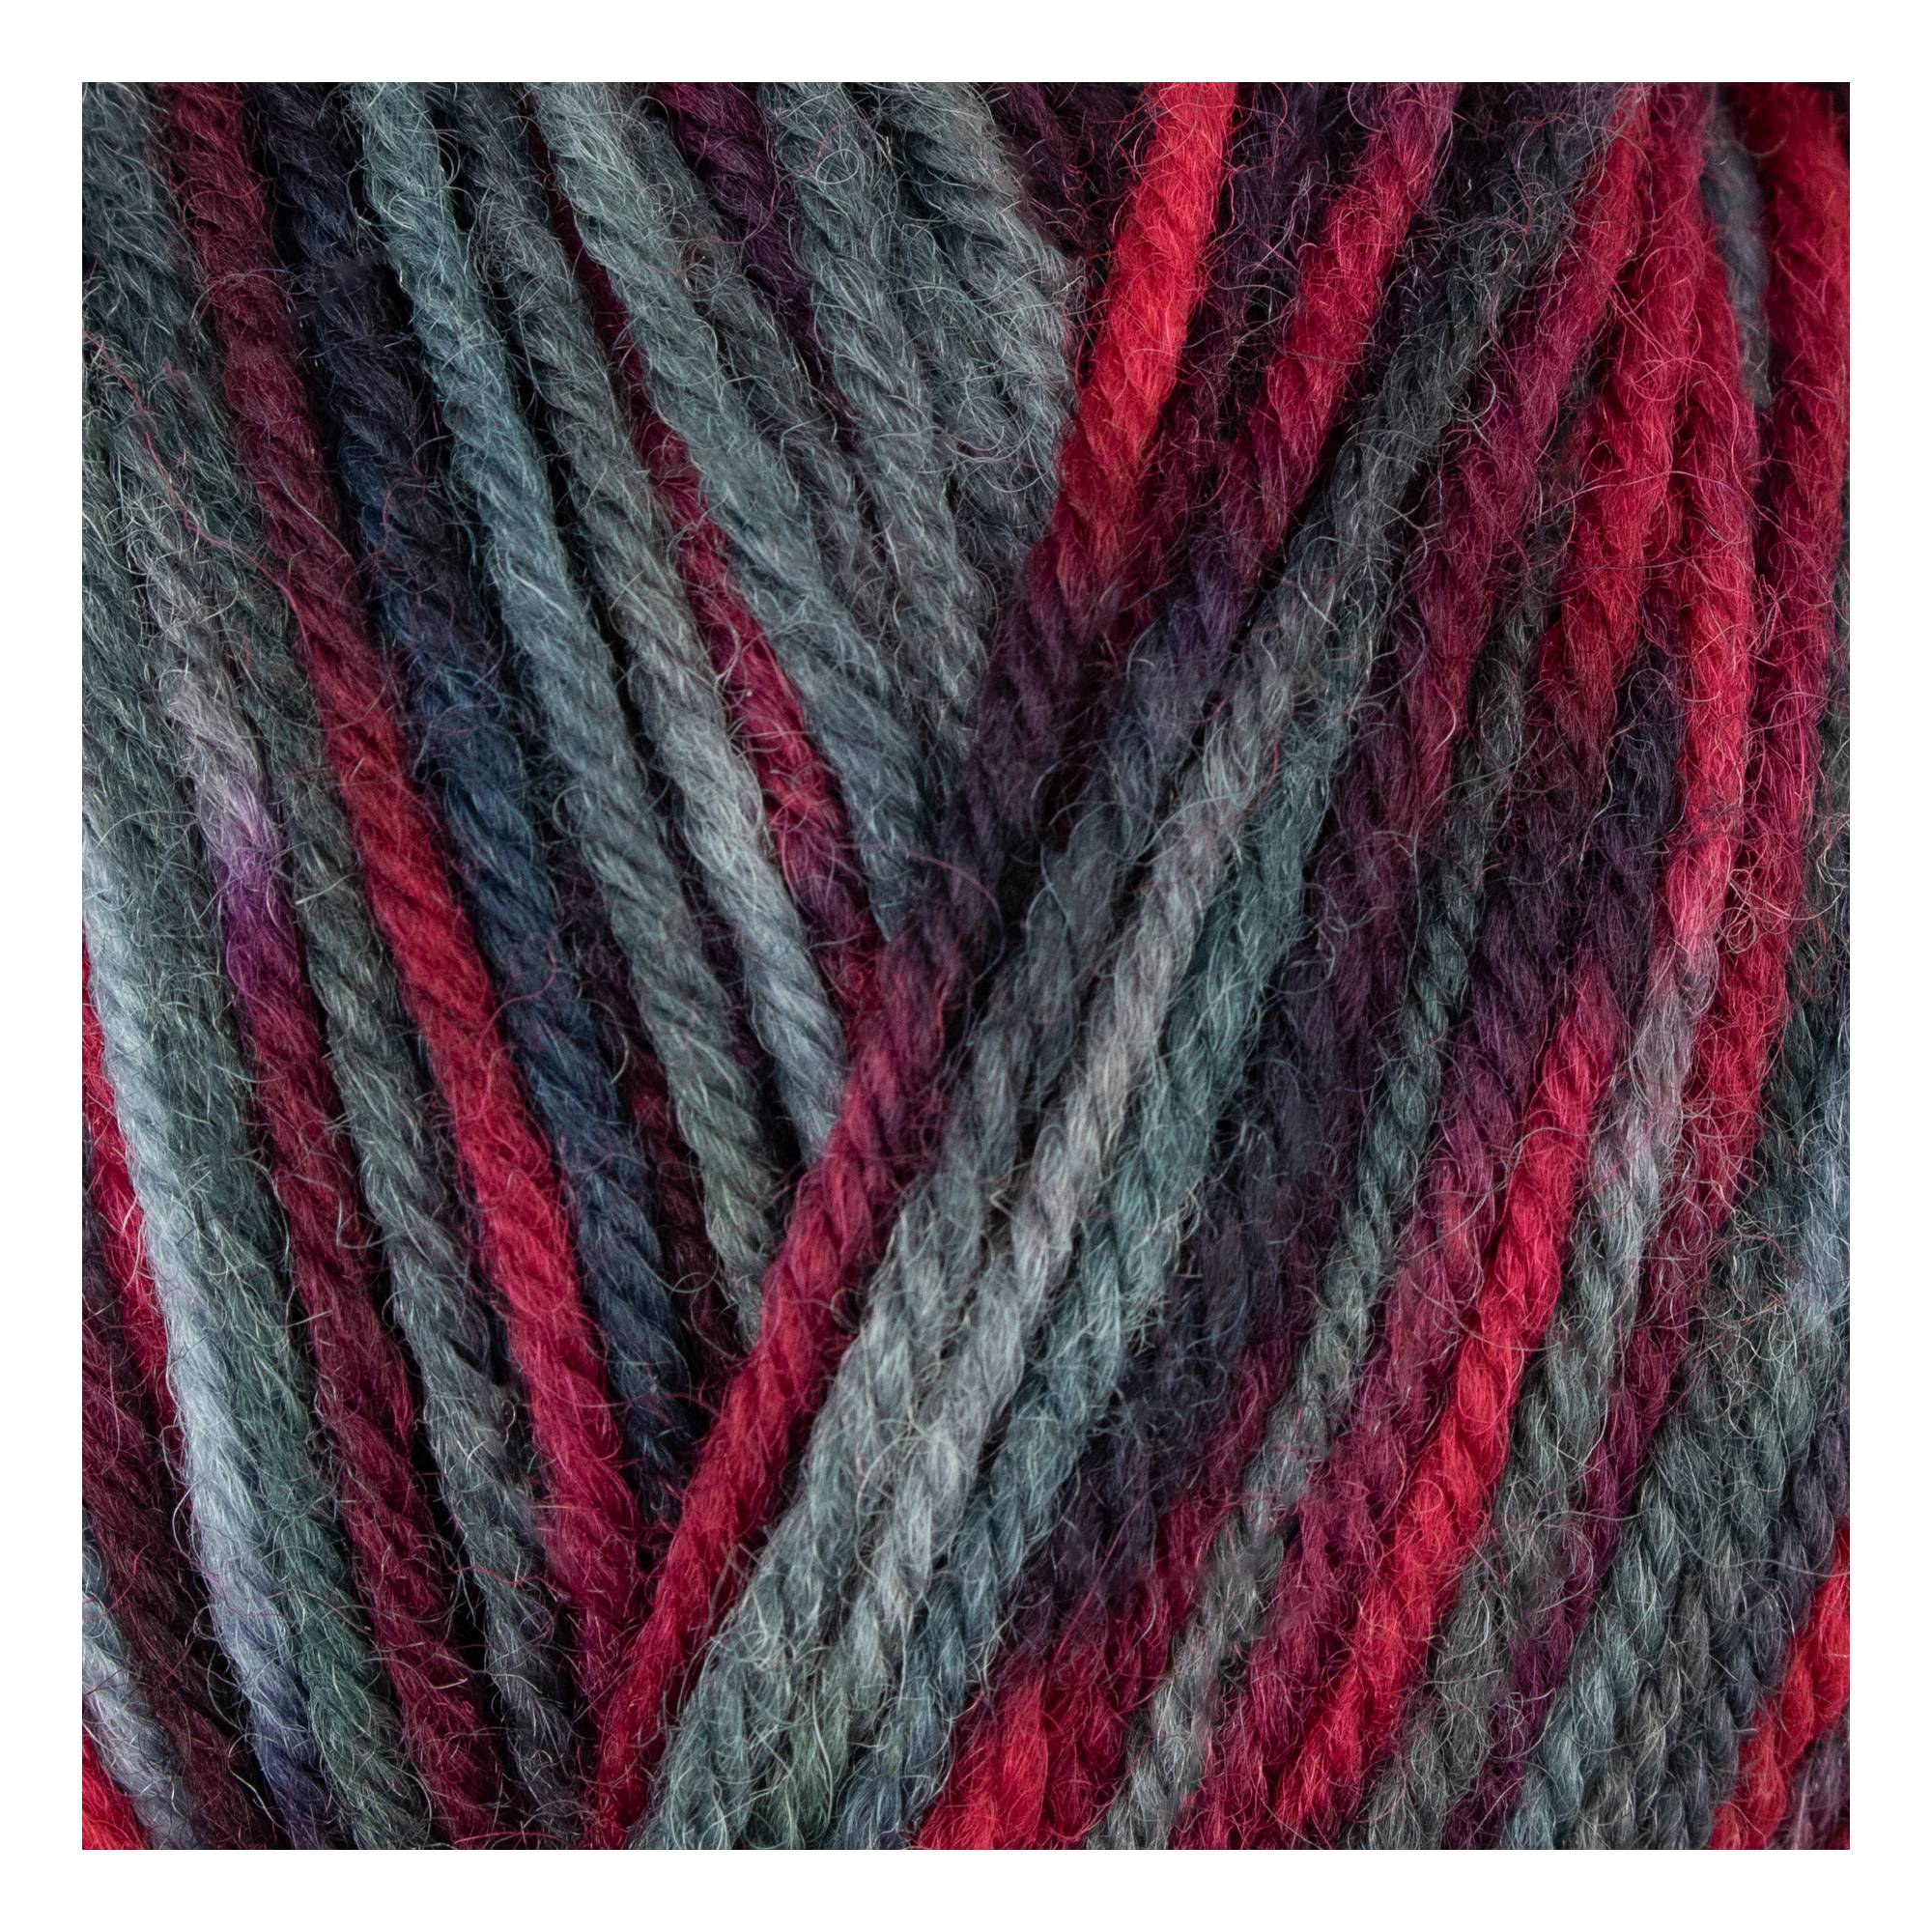 West Yorkshire Spinners Rock ColourLab Sock DK 150g